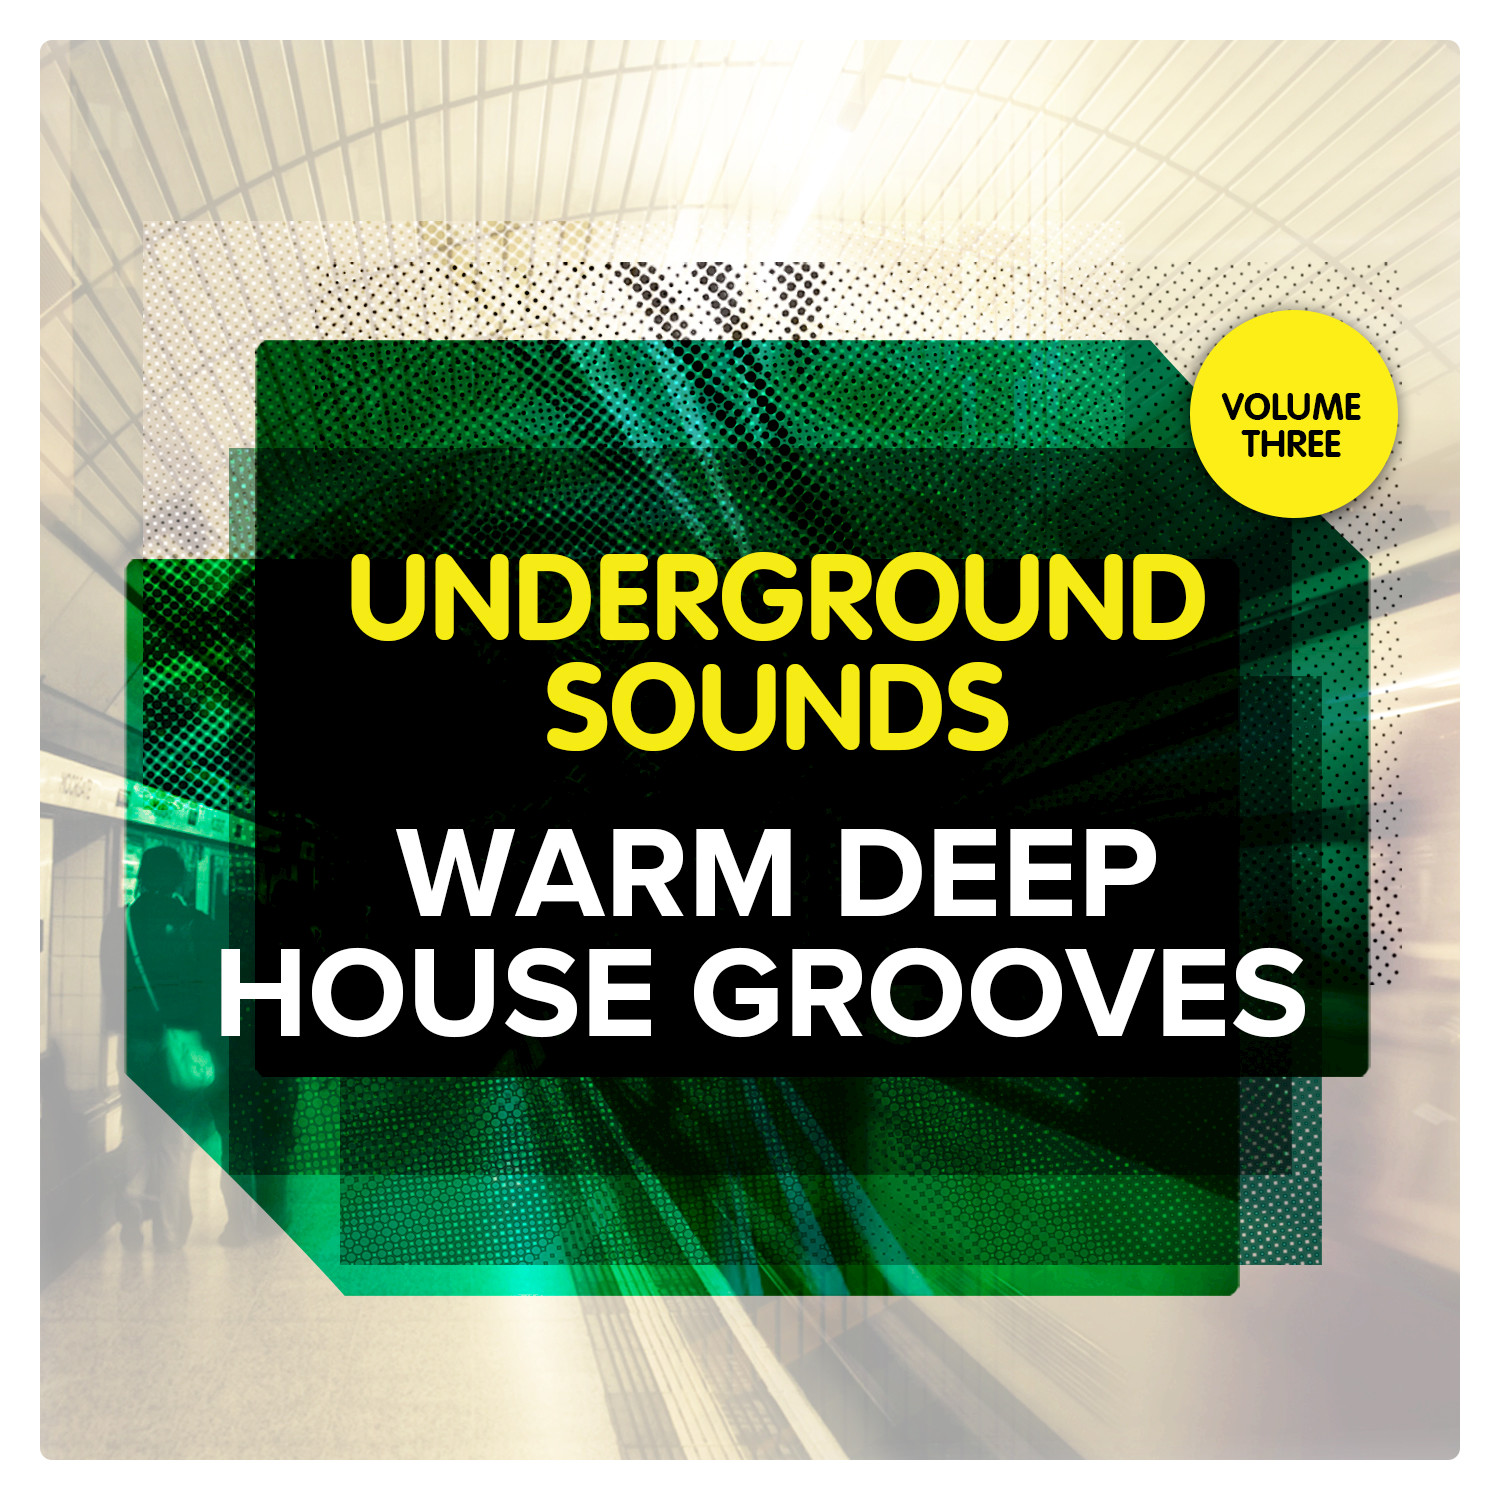 Warm Deep House Grooves - Underground Sounds Vol. 3